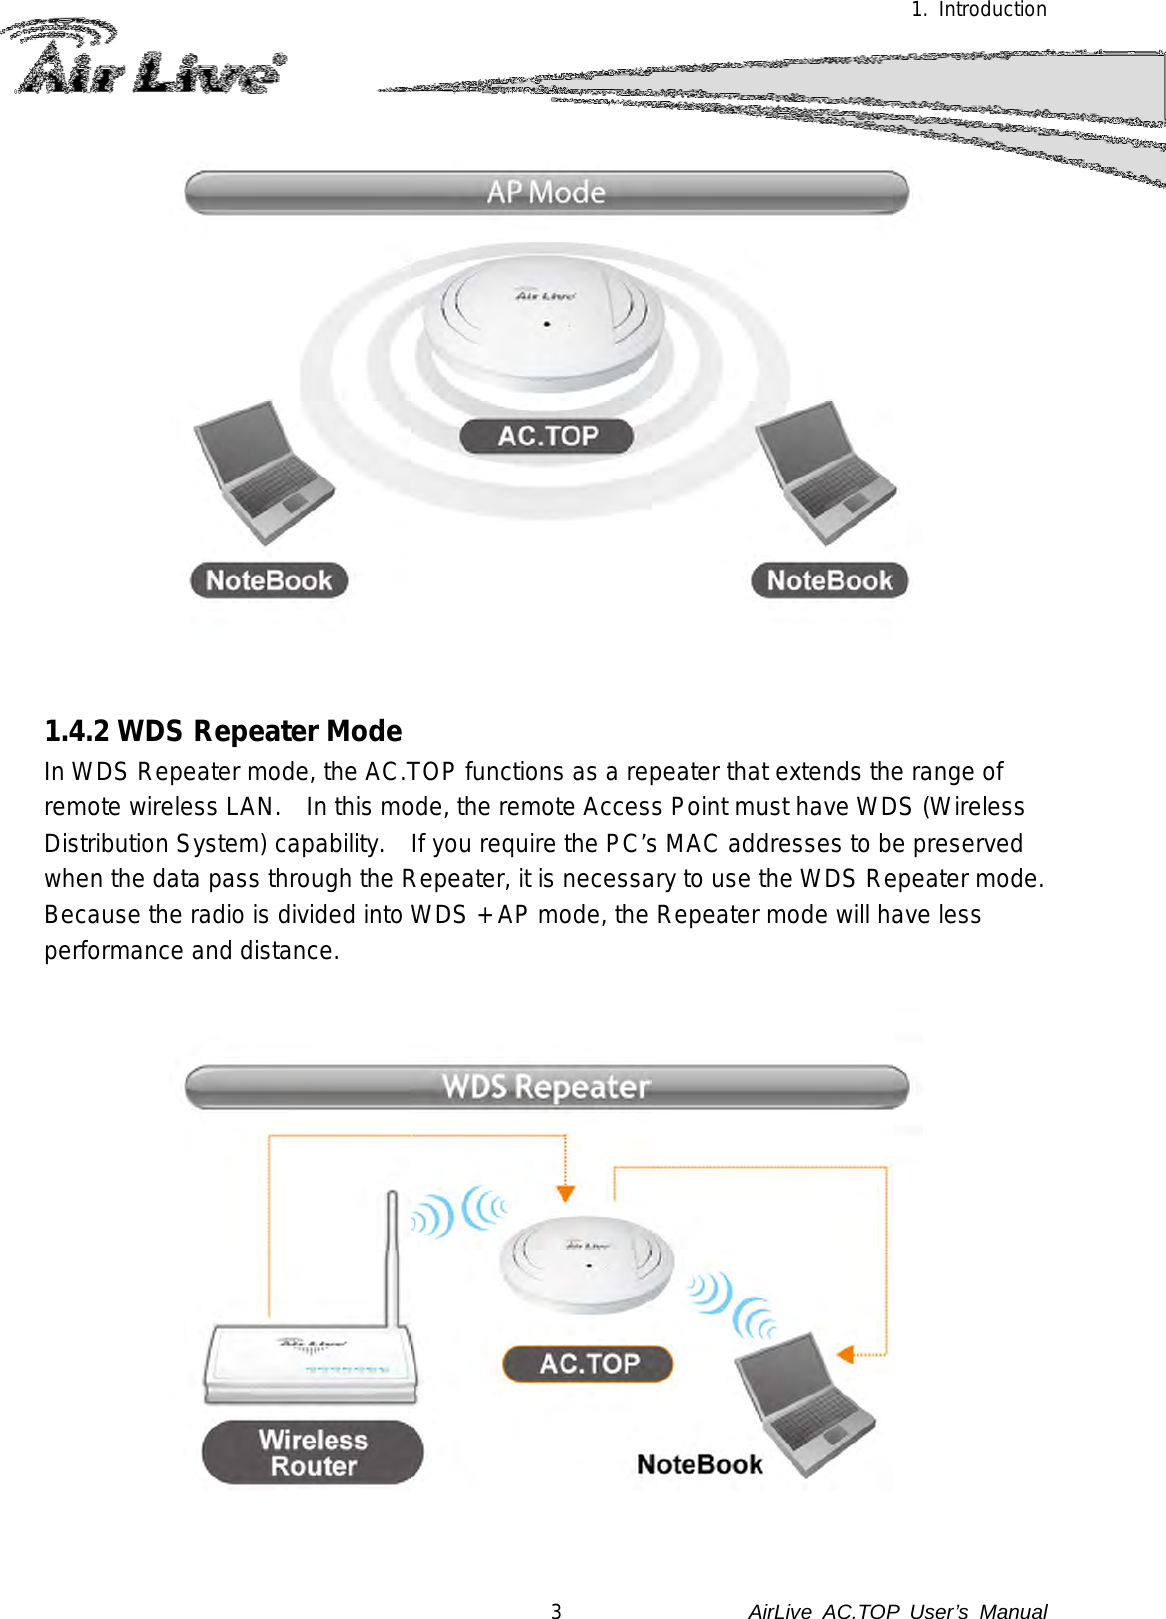 1. Introduction   1.4.2 WDS Repeater Mode In WDS Repeater mode, the AC.TOP functions as a repeater that extends the range of remote wireless LAN.   In this mode, the remote Access Point must have WDS (Wireless Distribution System) capability.   If you require the PC’s MAC addresses to be preserved when the data pass through the Repeater, it is necessary to use the WDS Repeater mode.   Because the radio is divided into WDS + AP mode, the Repeater mode will have less performance and distance.  3               AirLive  AC.TOP User’s Manual 